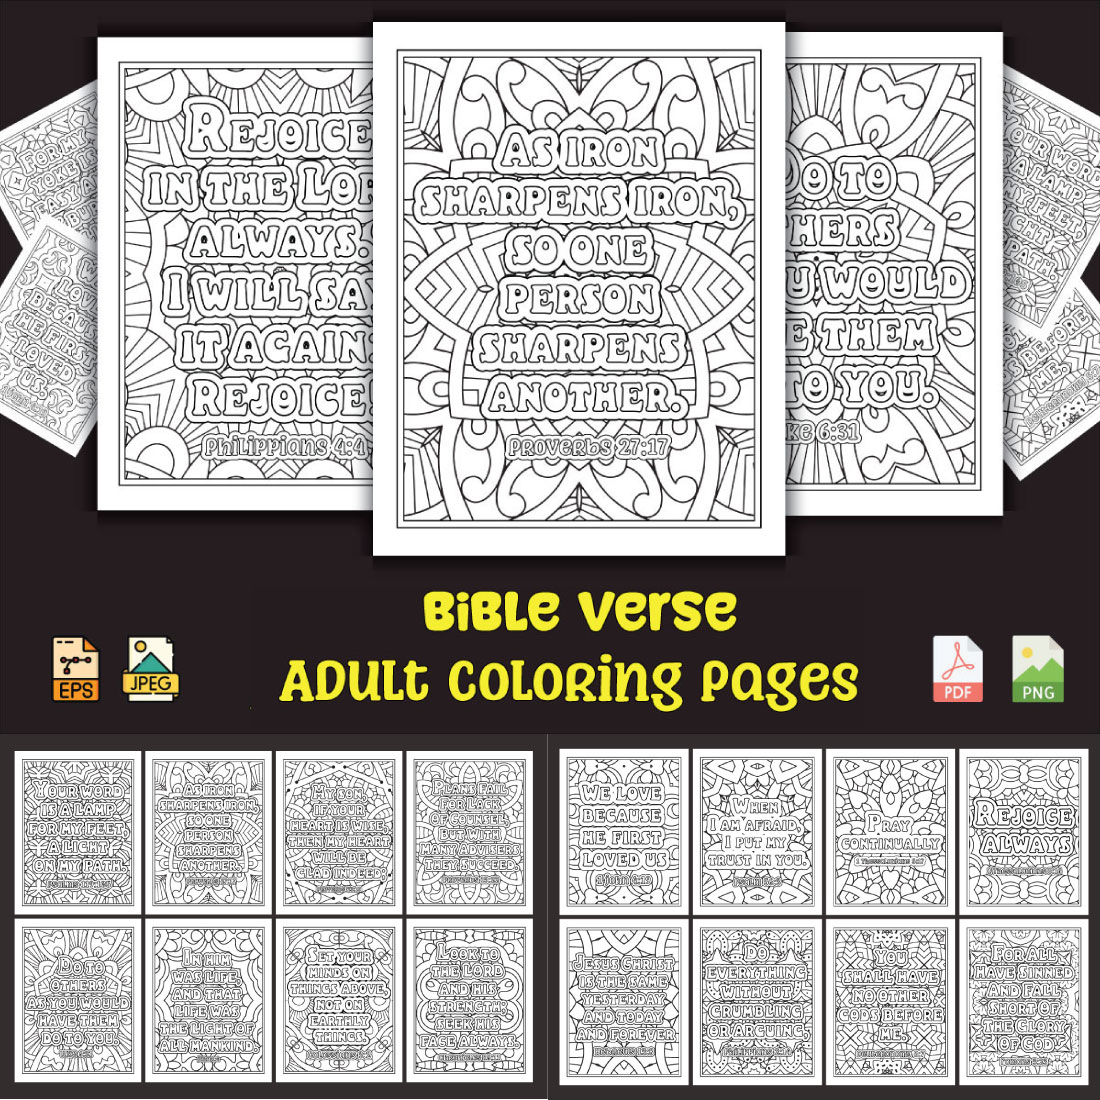 Bible Verse Coloring Pages cover image.